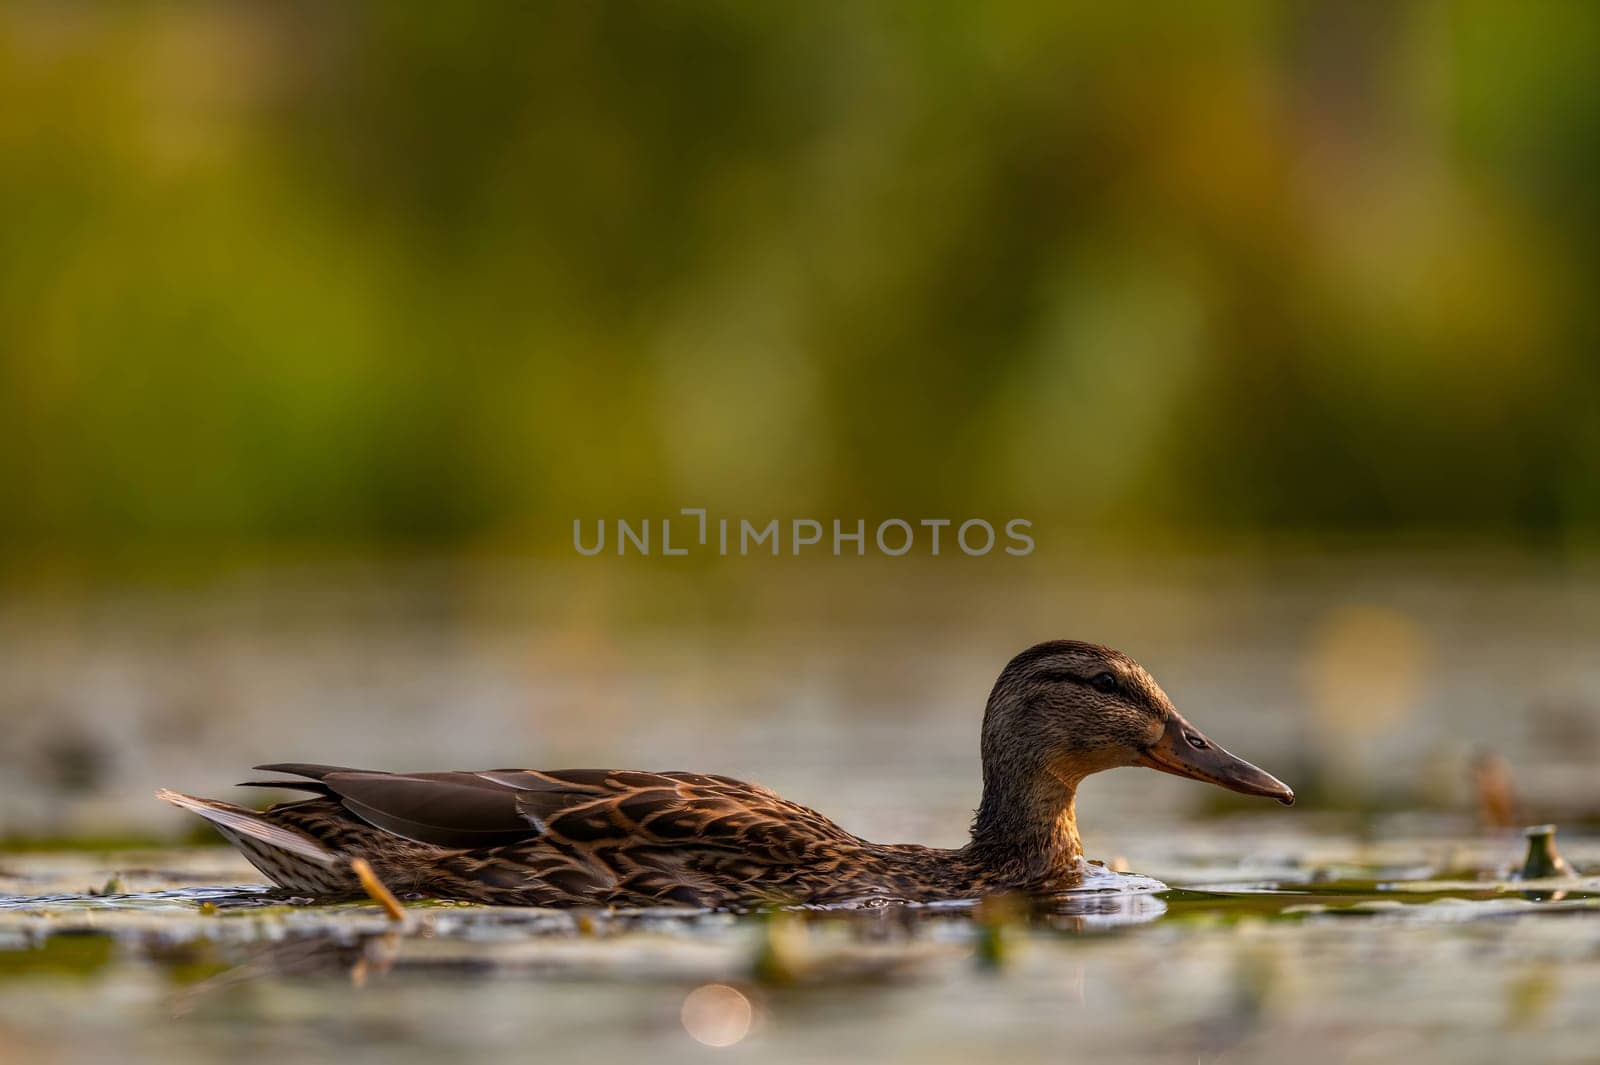 A serene wild duck gracefully gliding on the water, its reflection mirrored below. The smudged vegetation in the background adds to the tranquil scene.